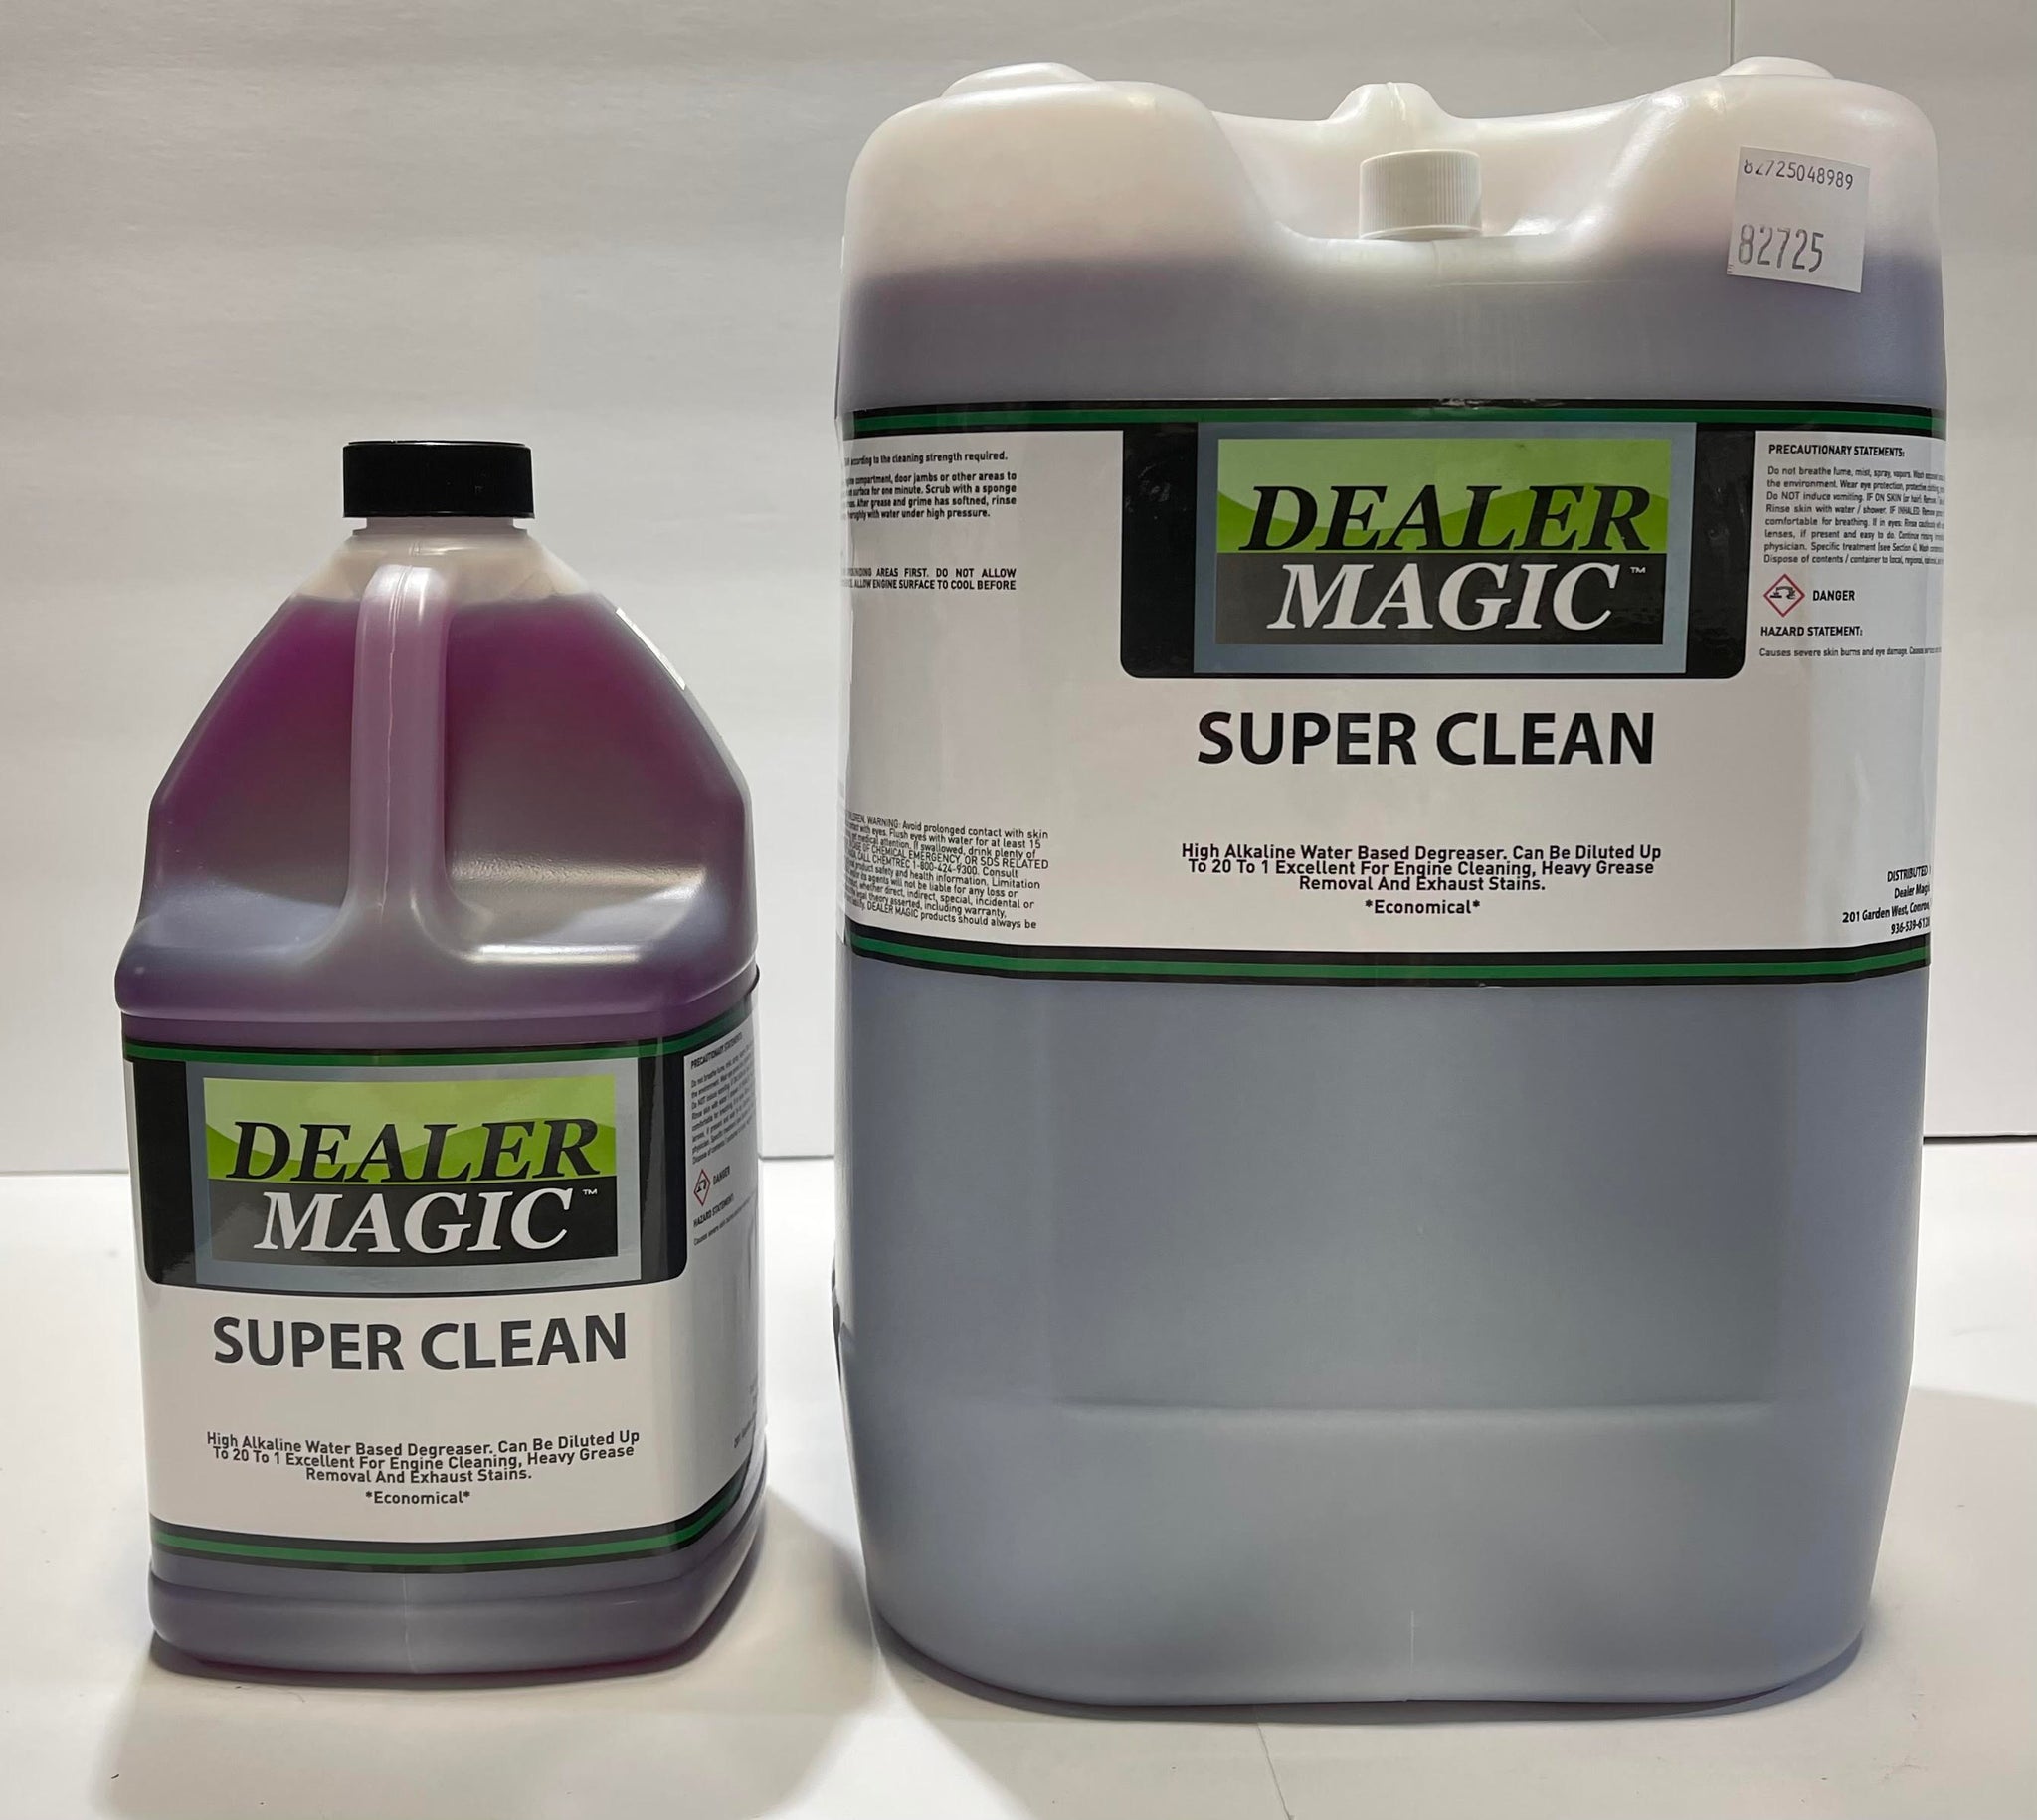 SuperClean Cleaner & Degreaser